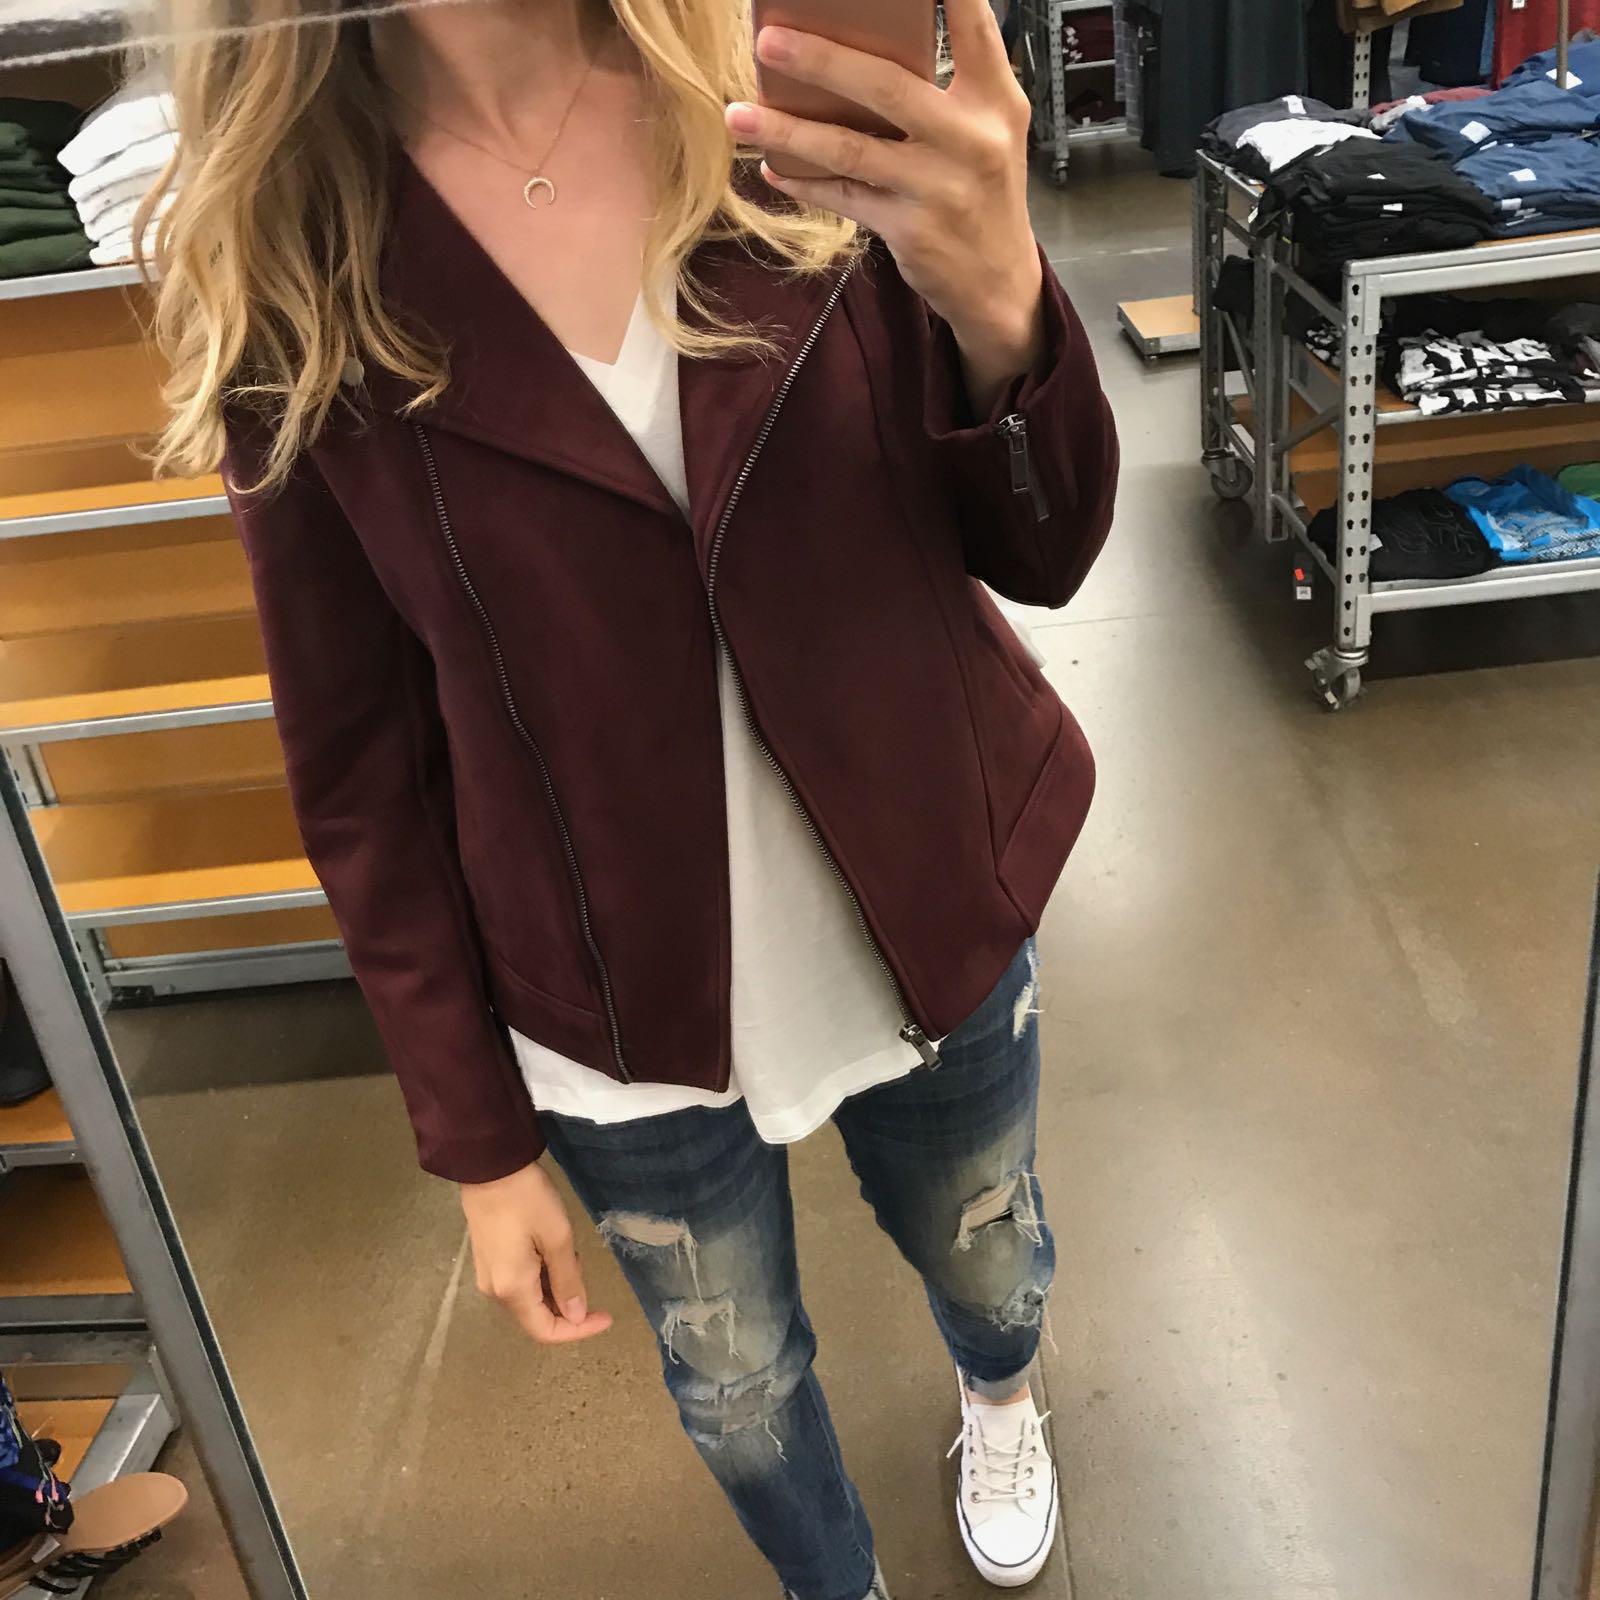 Fall finds at Old Navy